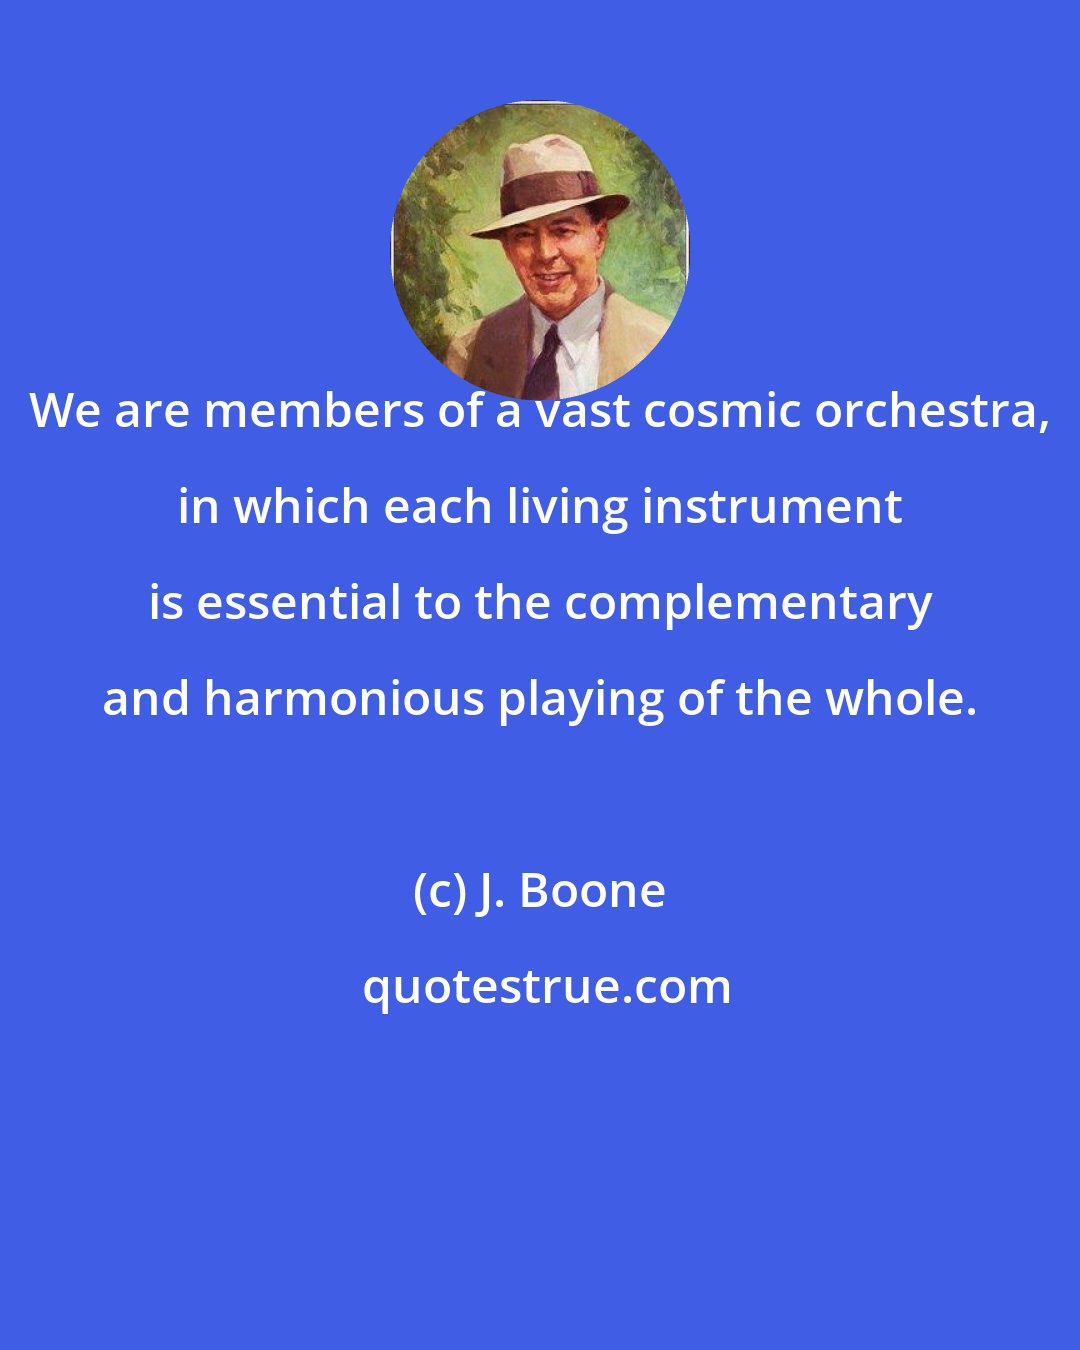 J. Boone: We are members of a vast cosmic orchestra, in which each living instrument is essential to the complementary and harmonious playing of the whole.